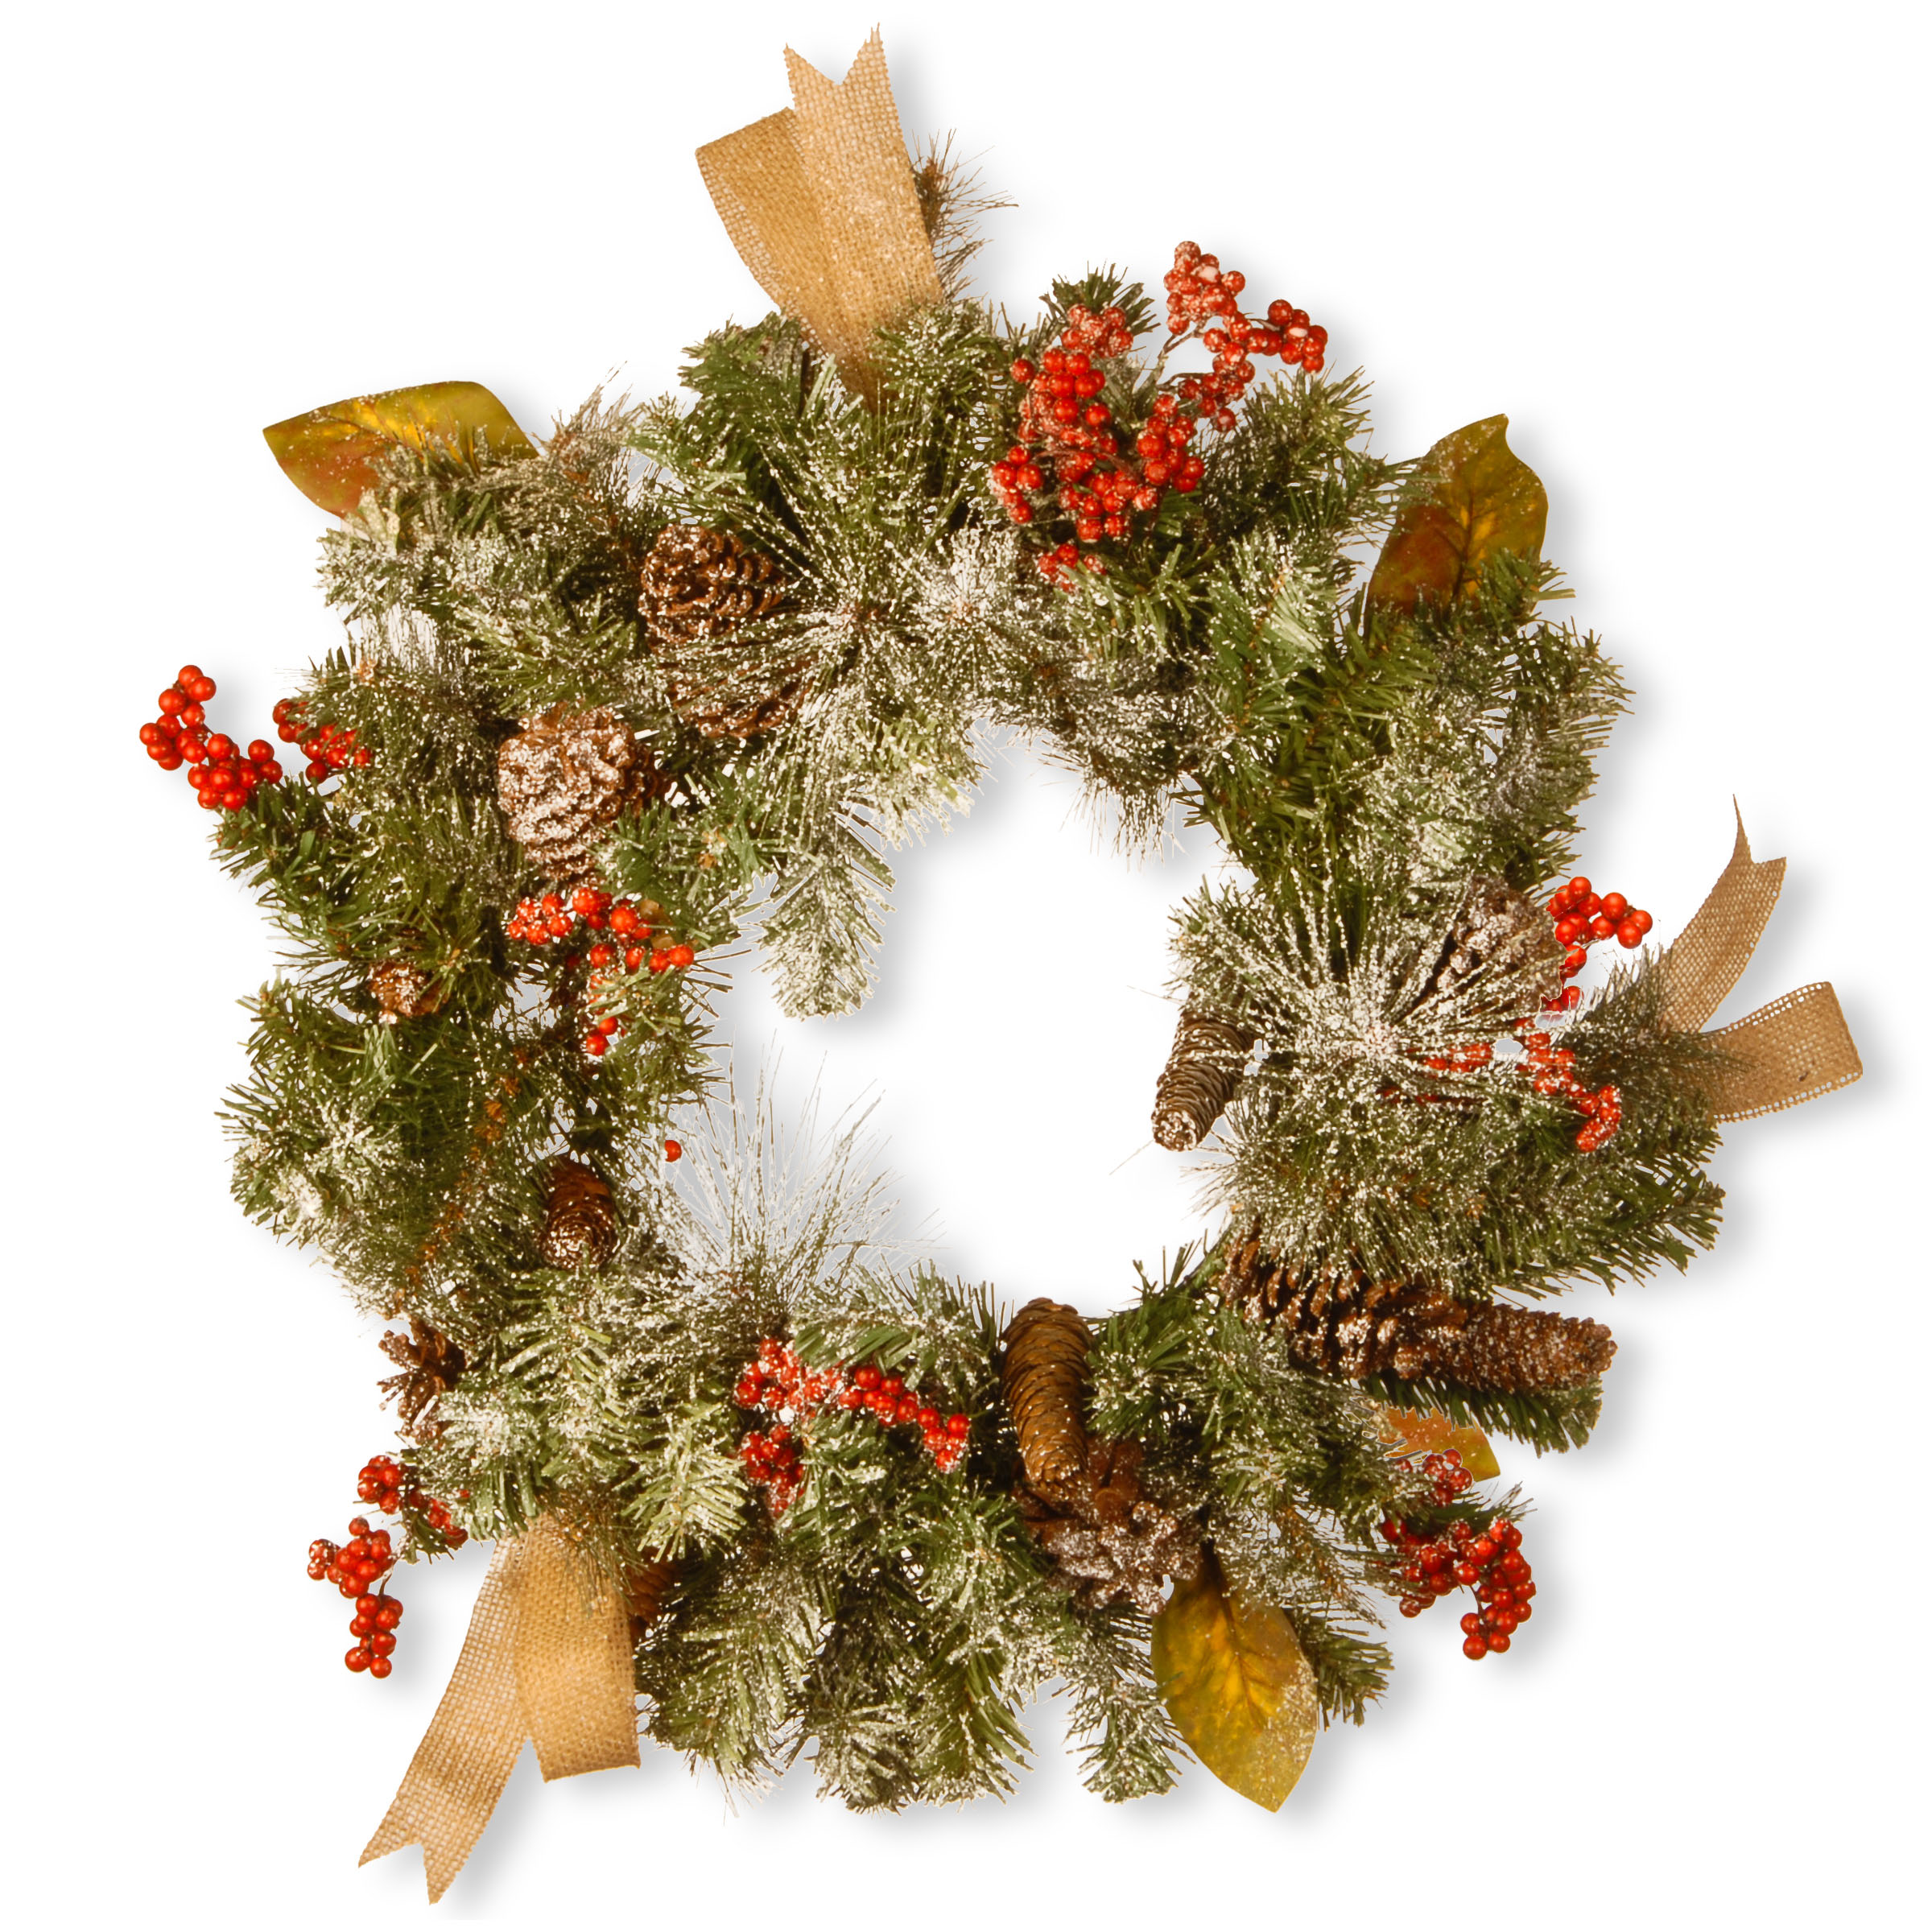 24 Inch Christmas Wreath With Cones: Unlit